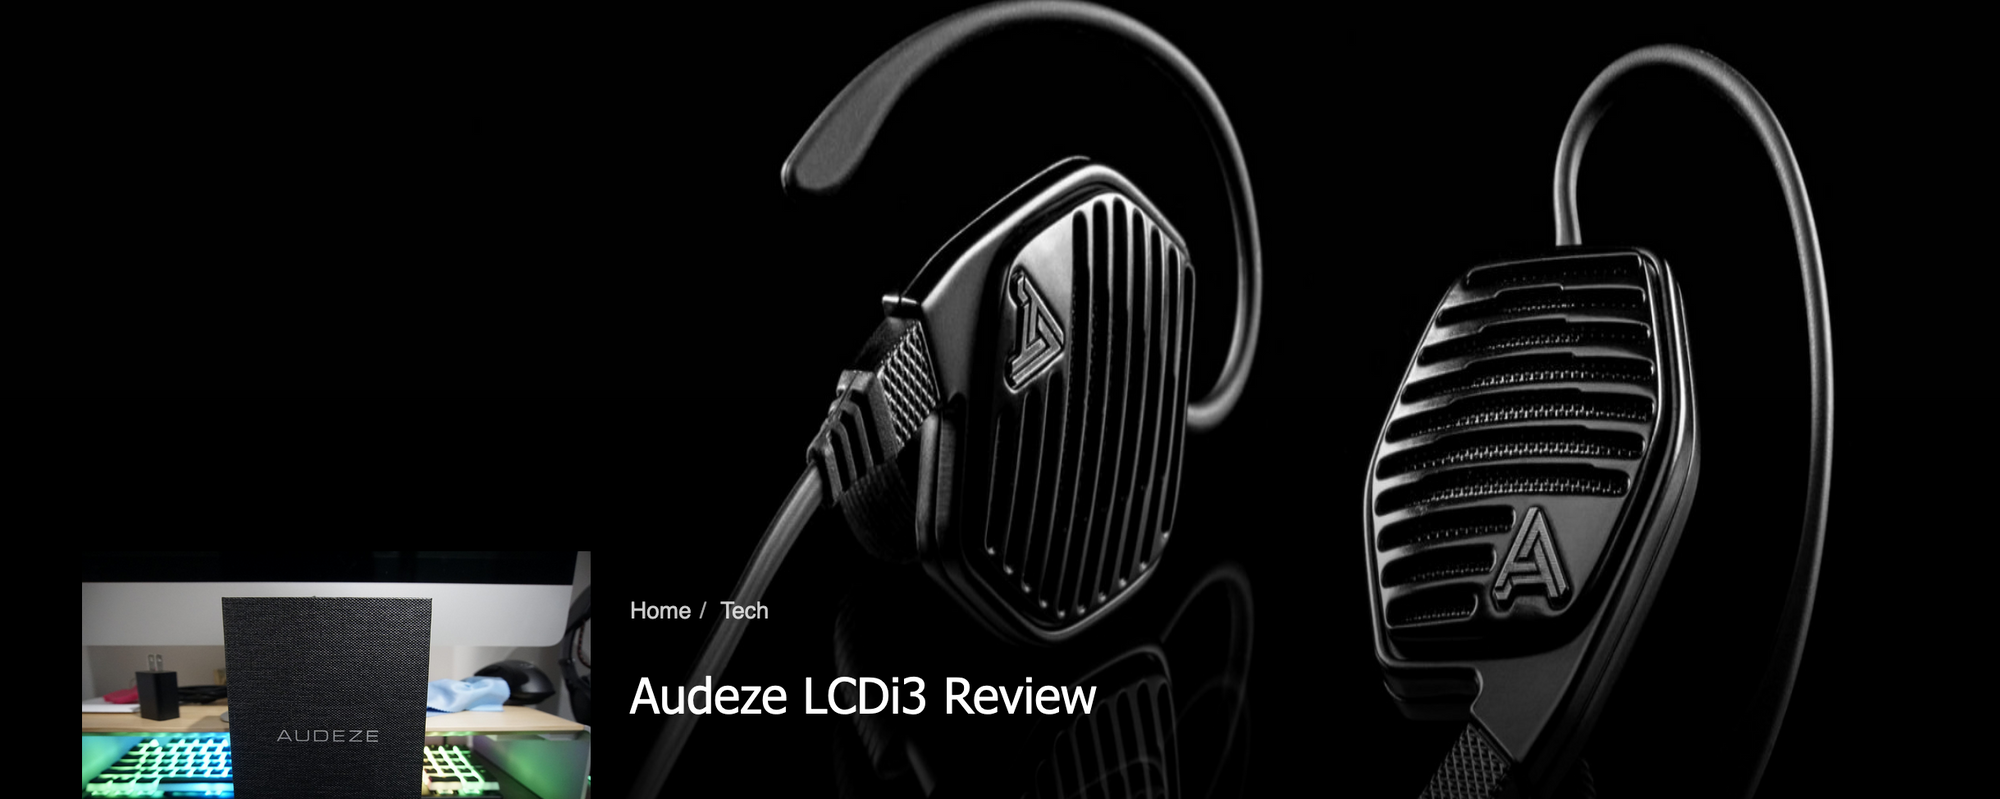 Audeze LCDi3 Gets Editor's Choice from Just Push Start